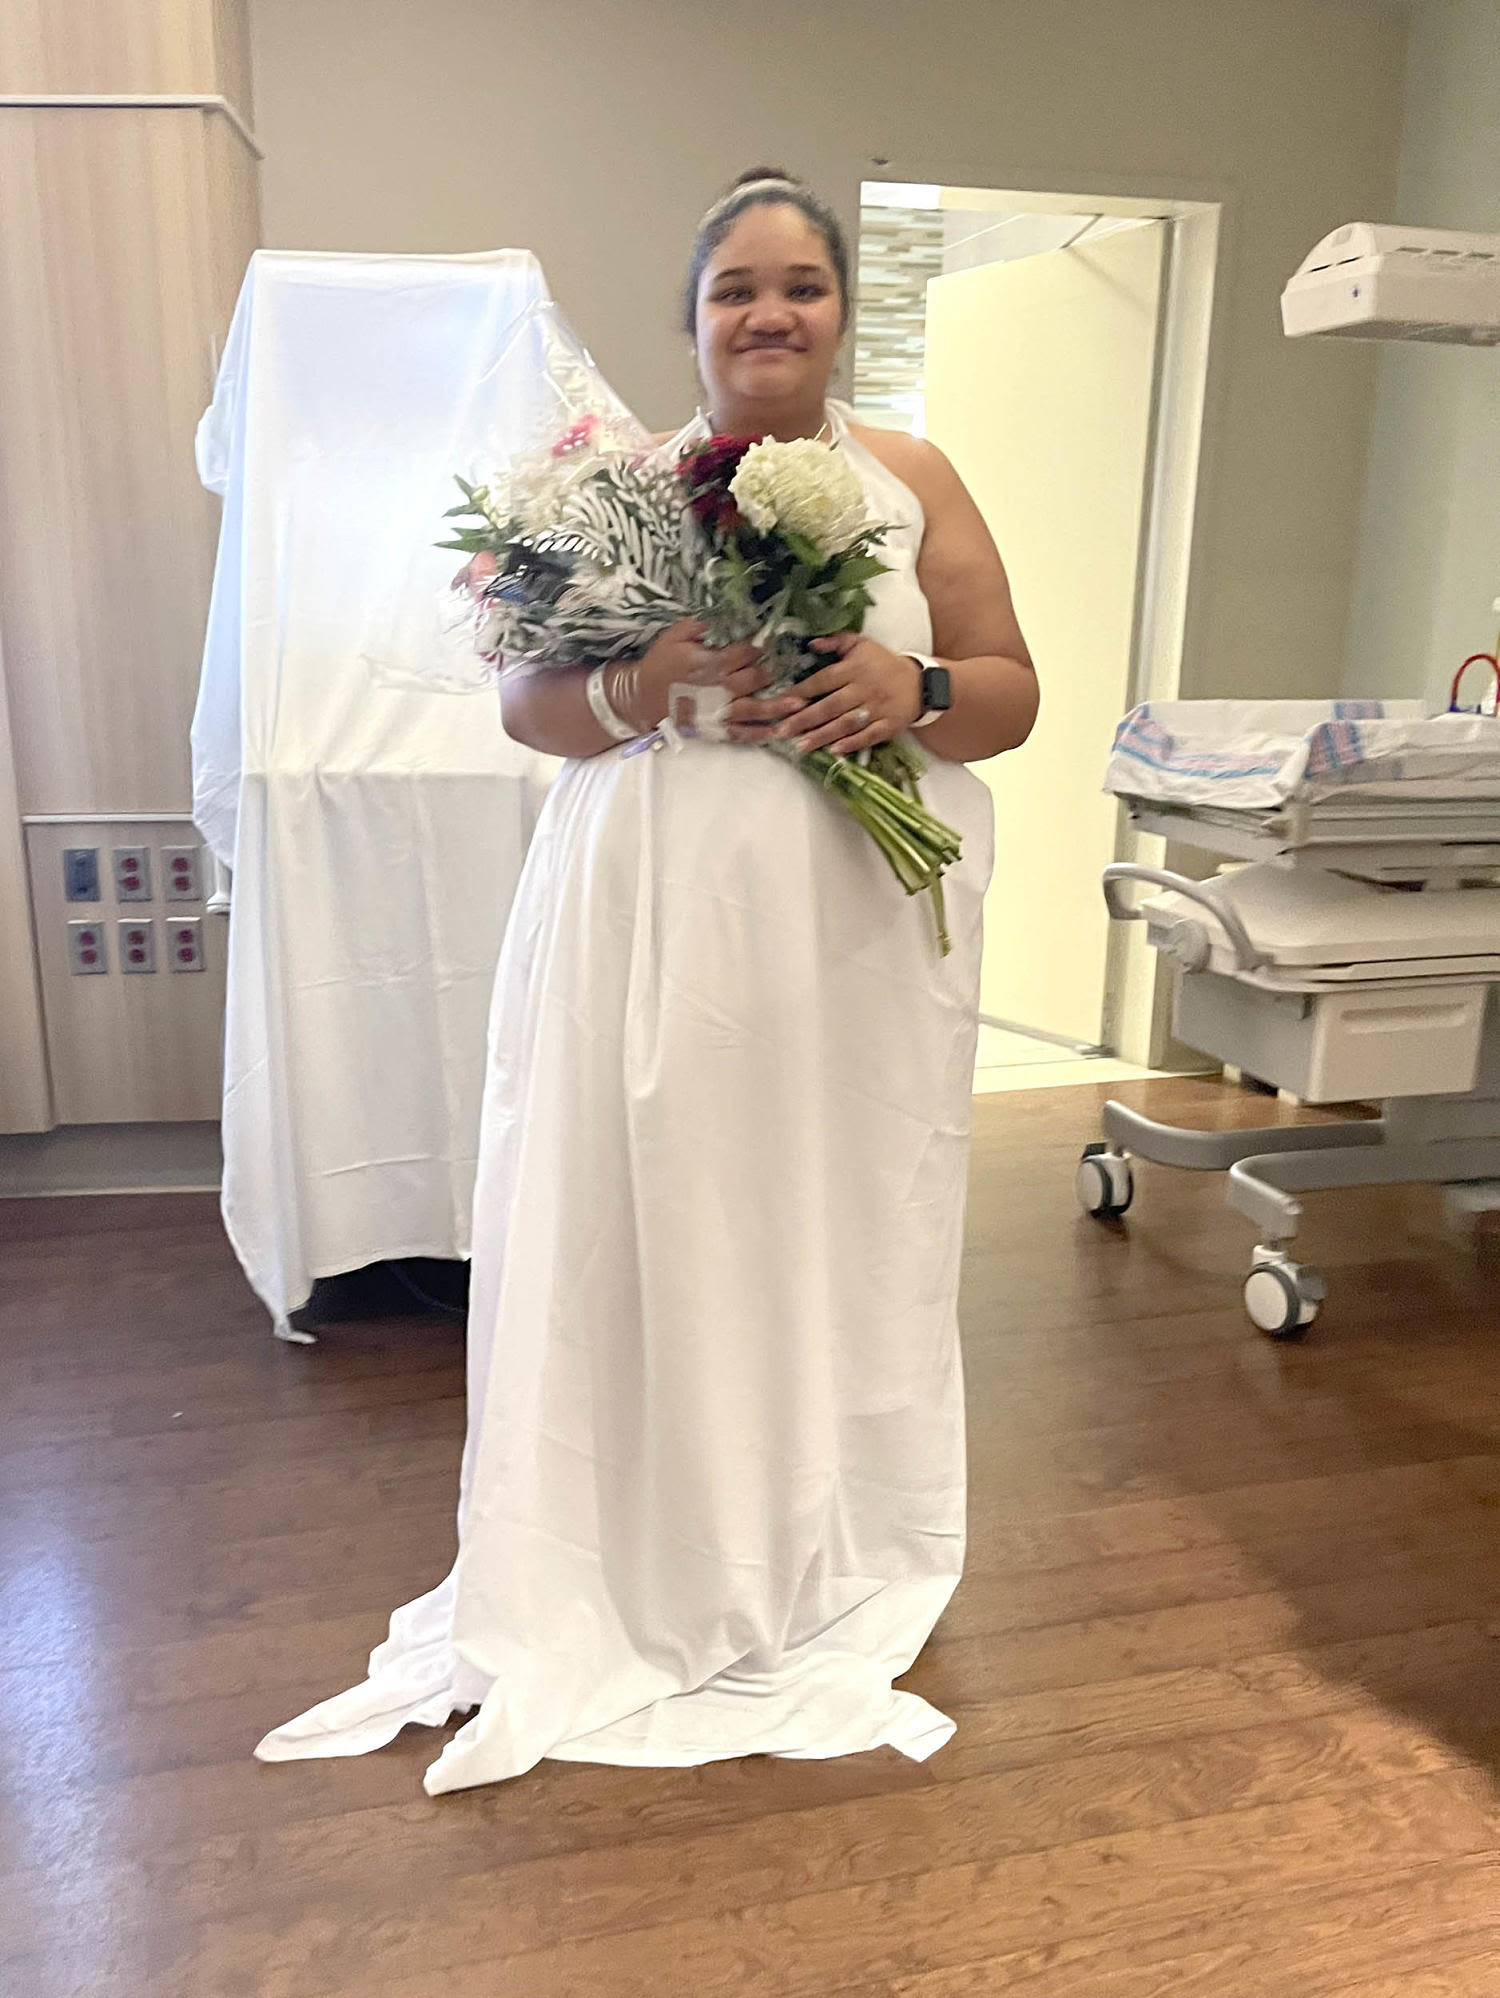 Pregnant bride gets married in hospital wearing ‘wedding dress’ of bed sheets